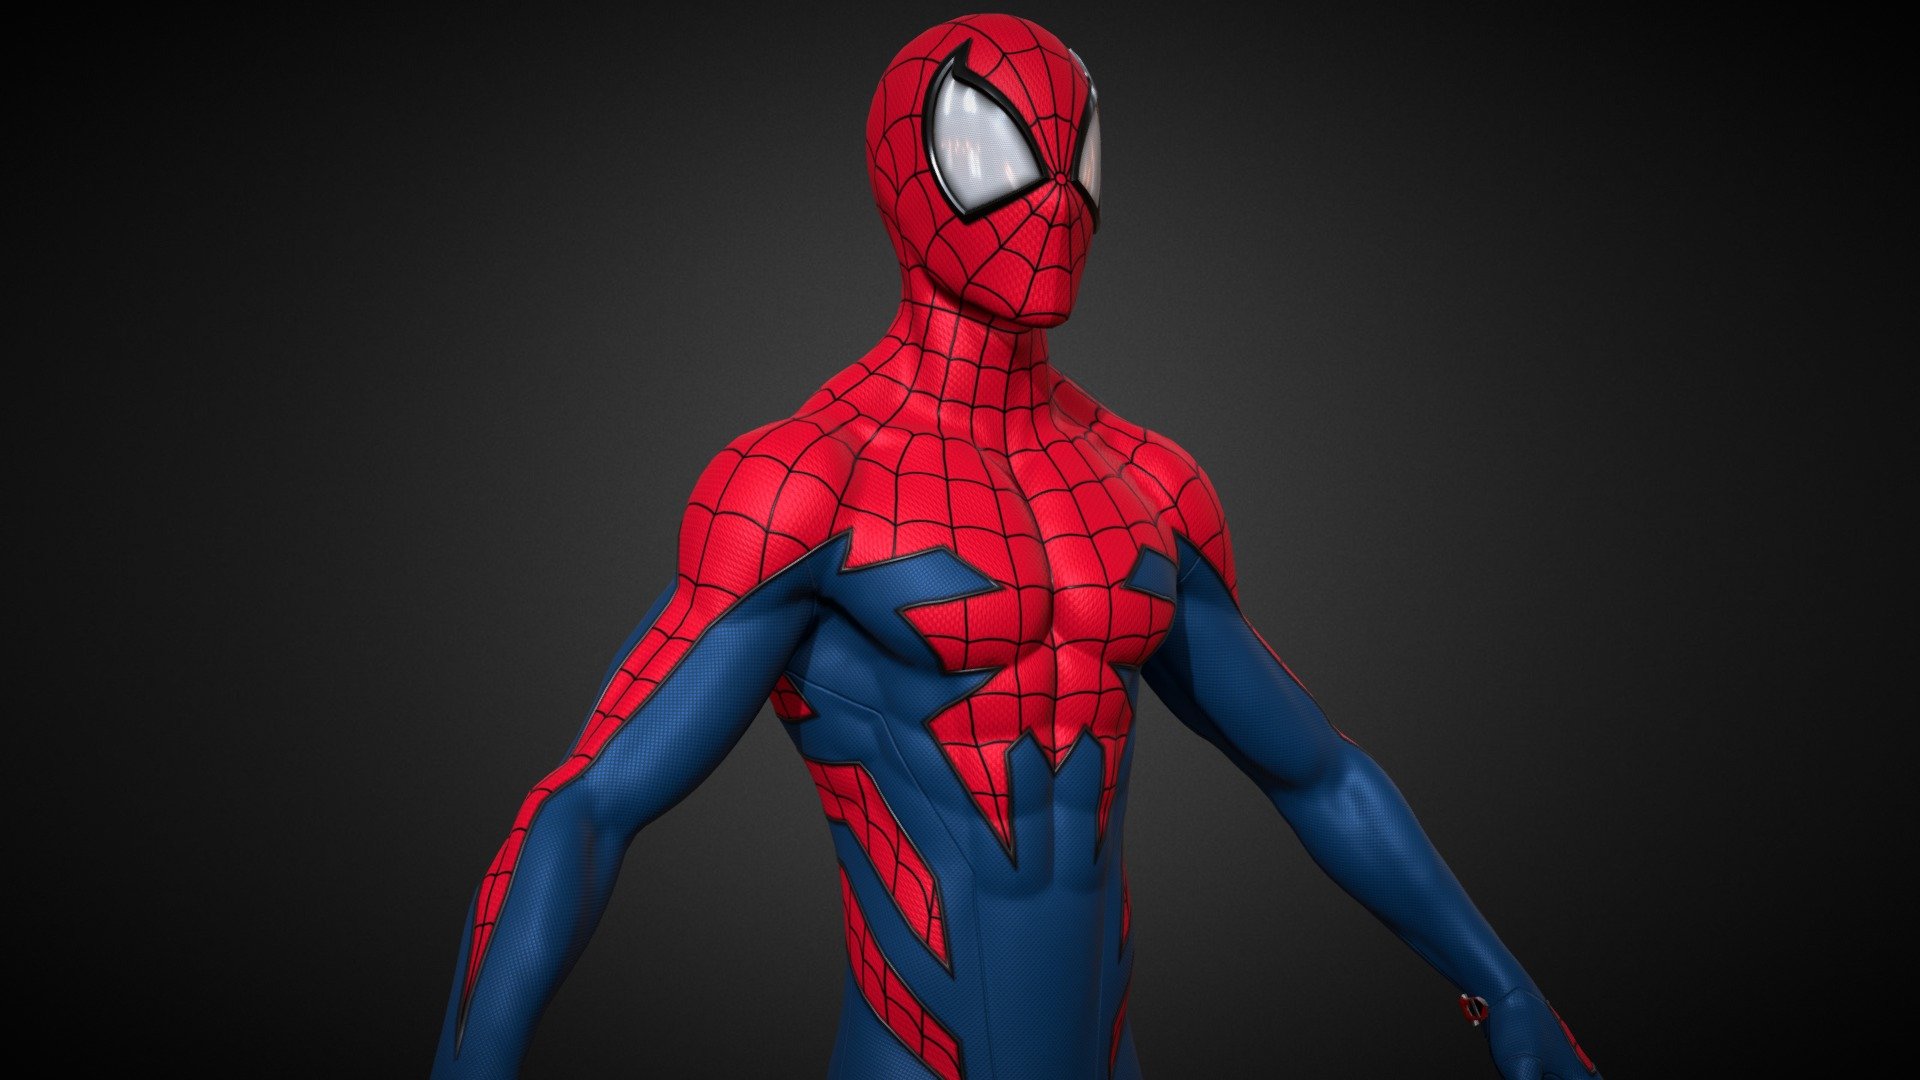 Spiderman comic books character published by Marvel Comics.




Model was made on Maya, Zbrush, substance painter and Blender

This model is  inspired by Spider-man House Of M Suit from Marvel Comics' House of M crossover event in 2005

The model has a Spider-man House Of M Suit.

High quality texture work.

The model come with complete 4k textures and Blender, FBX And OBJ file formats

The model has 2 materials contains 6 maps Basecolor, Roughness, Metalness, Specular, Normal and Ao

All textures and materials are included and mapped. (4k resoulutions)

No special plugin needed to open scene

The model can be rigg easily
 - Spider-Man House Of M Suit - Buy Royalty Free 3D model by AFSHAN ALI (@Aliflex) 3d model